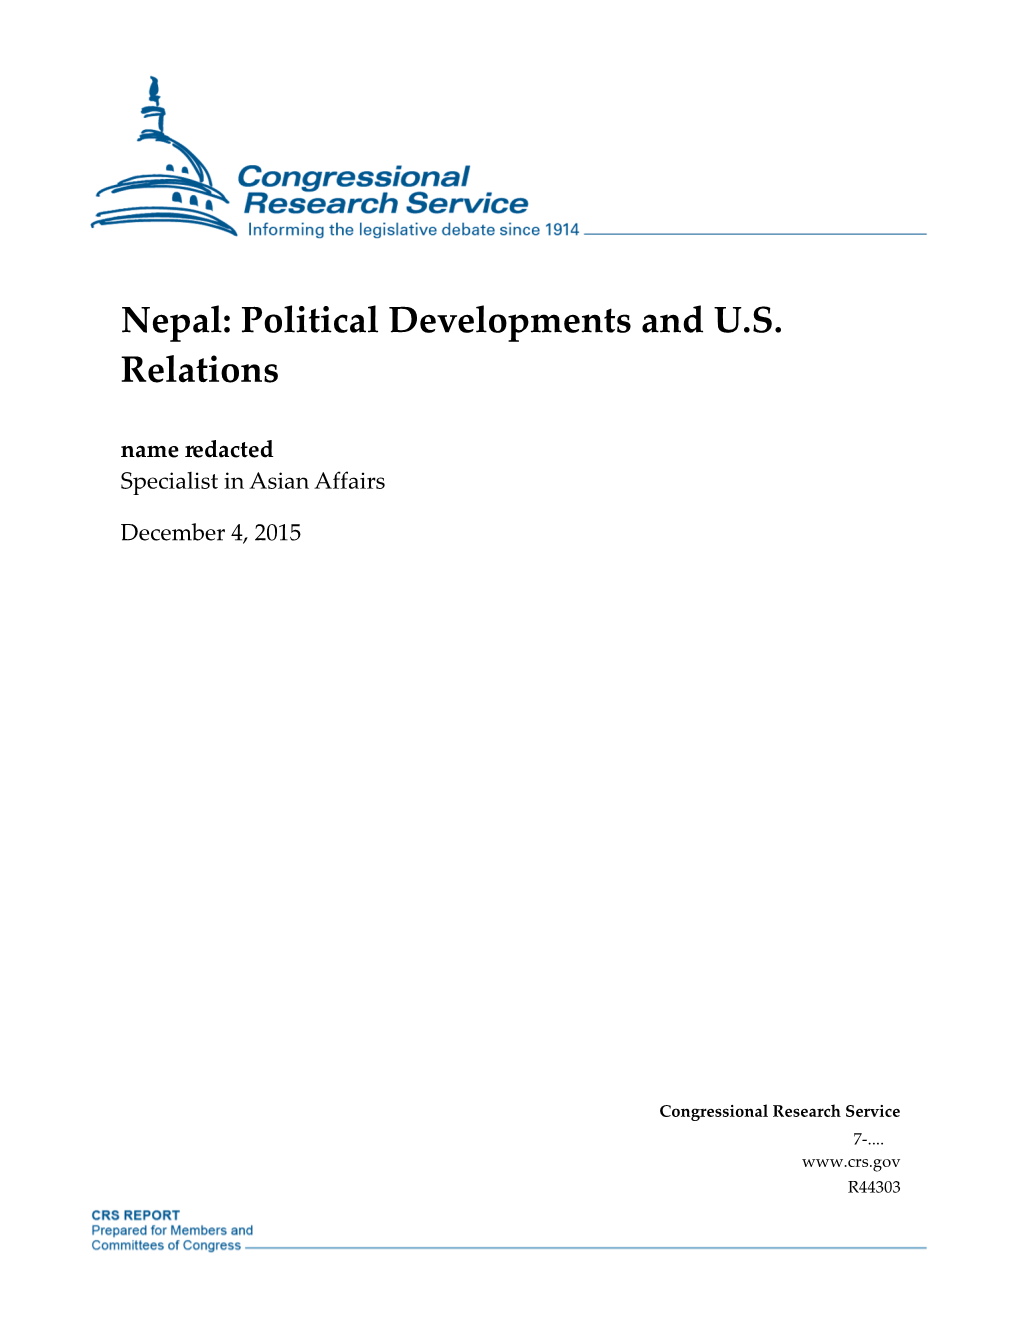 Nepal: Political Developments and U.S. Relations Name Redacted Specialist in Asian Affairs